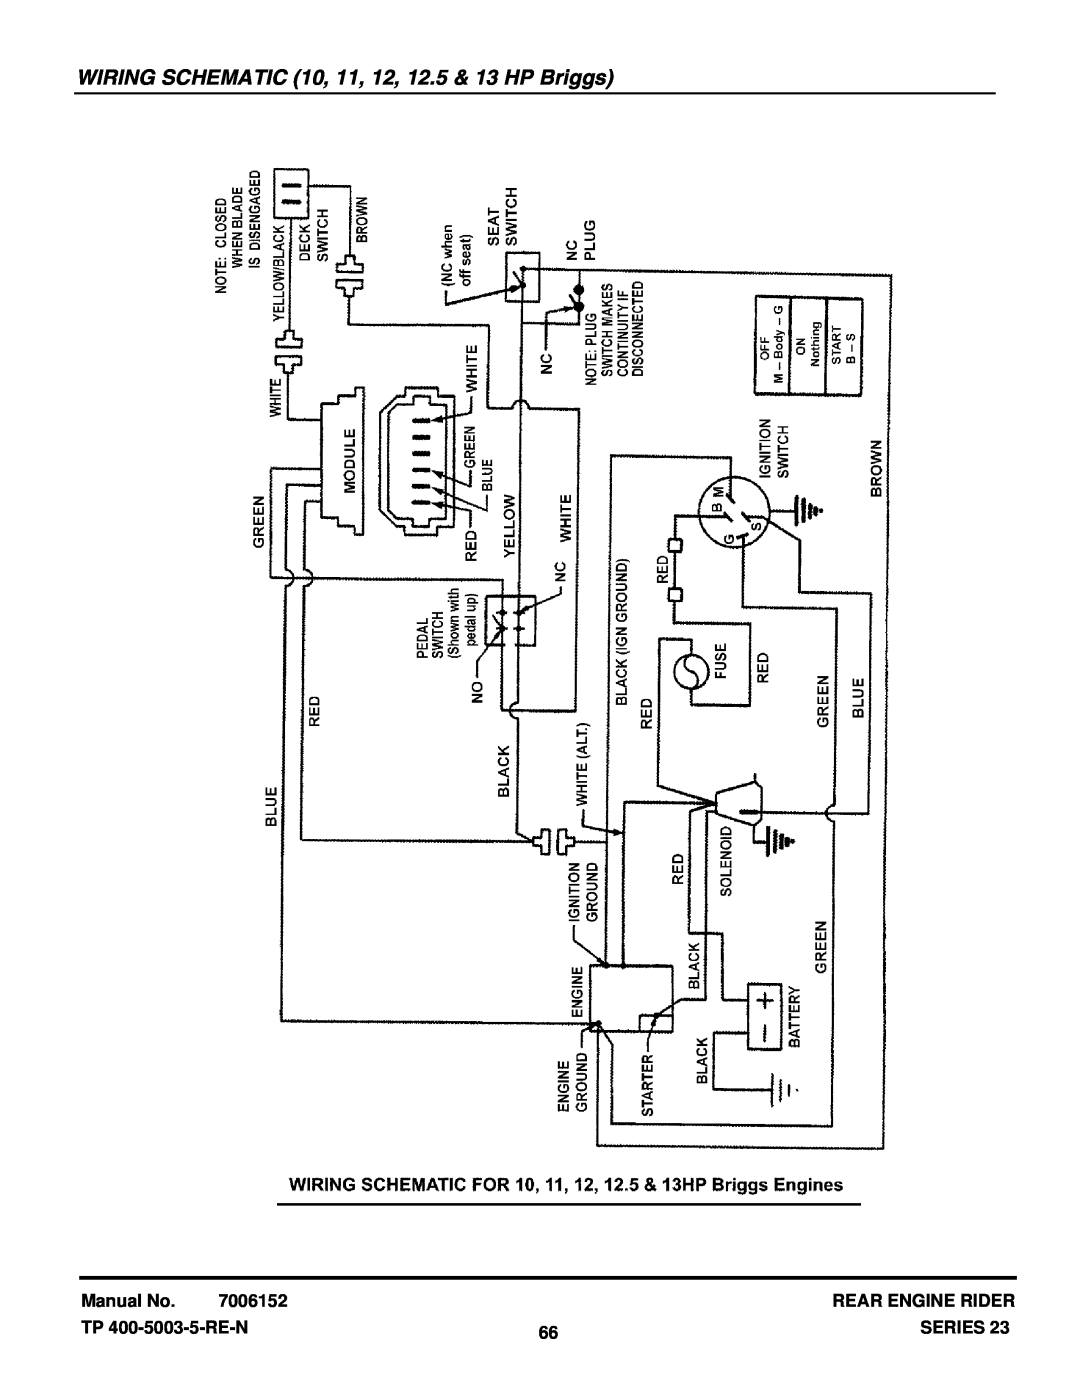 Snapper 281023BVE manual WIRING SCHEMATIC 10, 11, 12, 12.5 & 13 HP Briggs, Manual No, 7006152, Rear Engine Rider, Series 